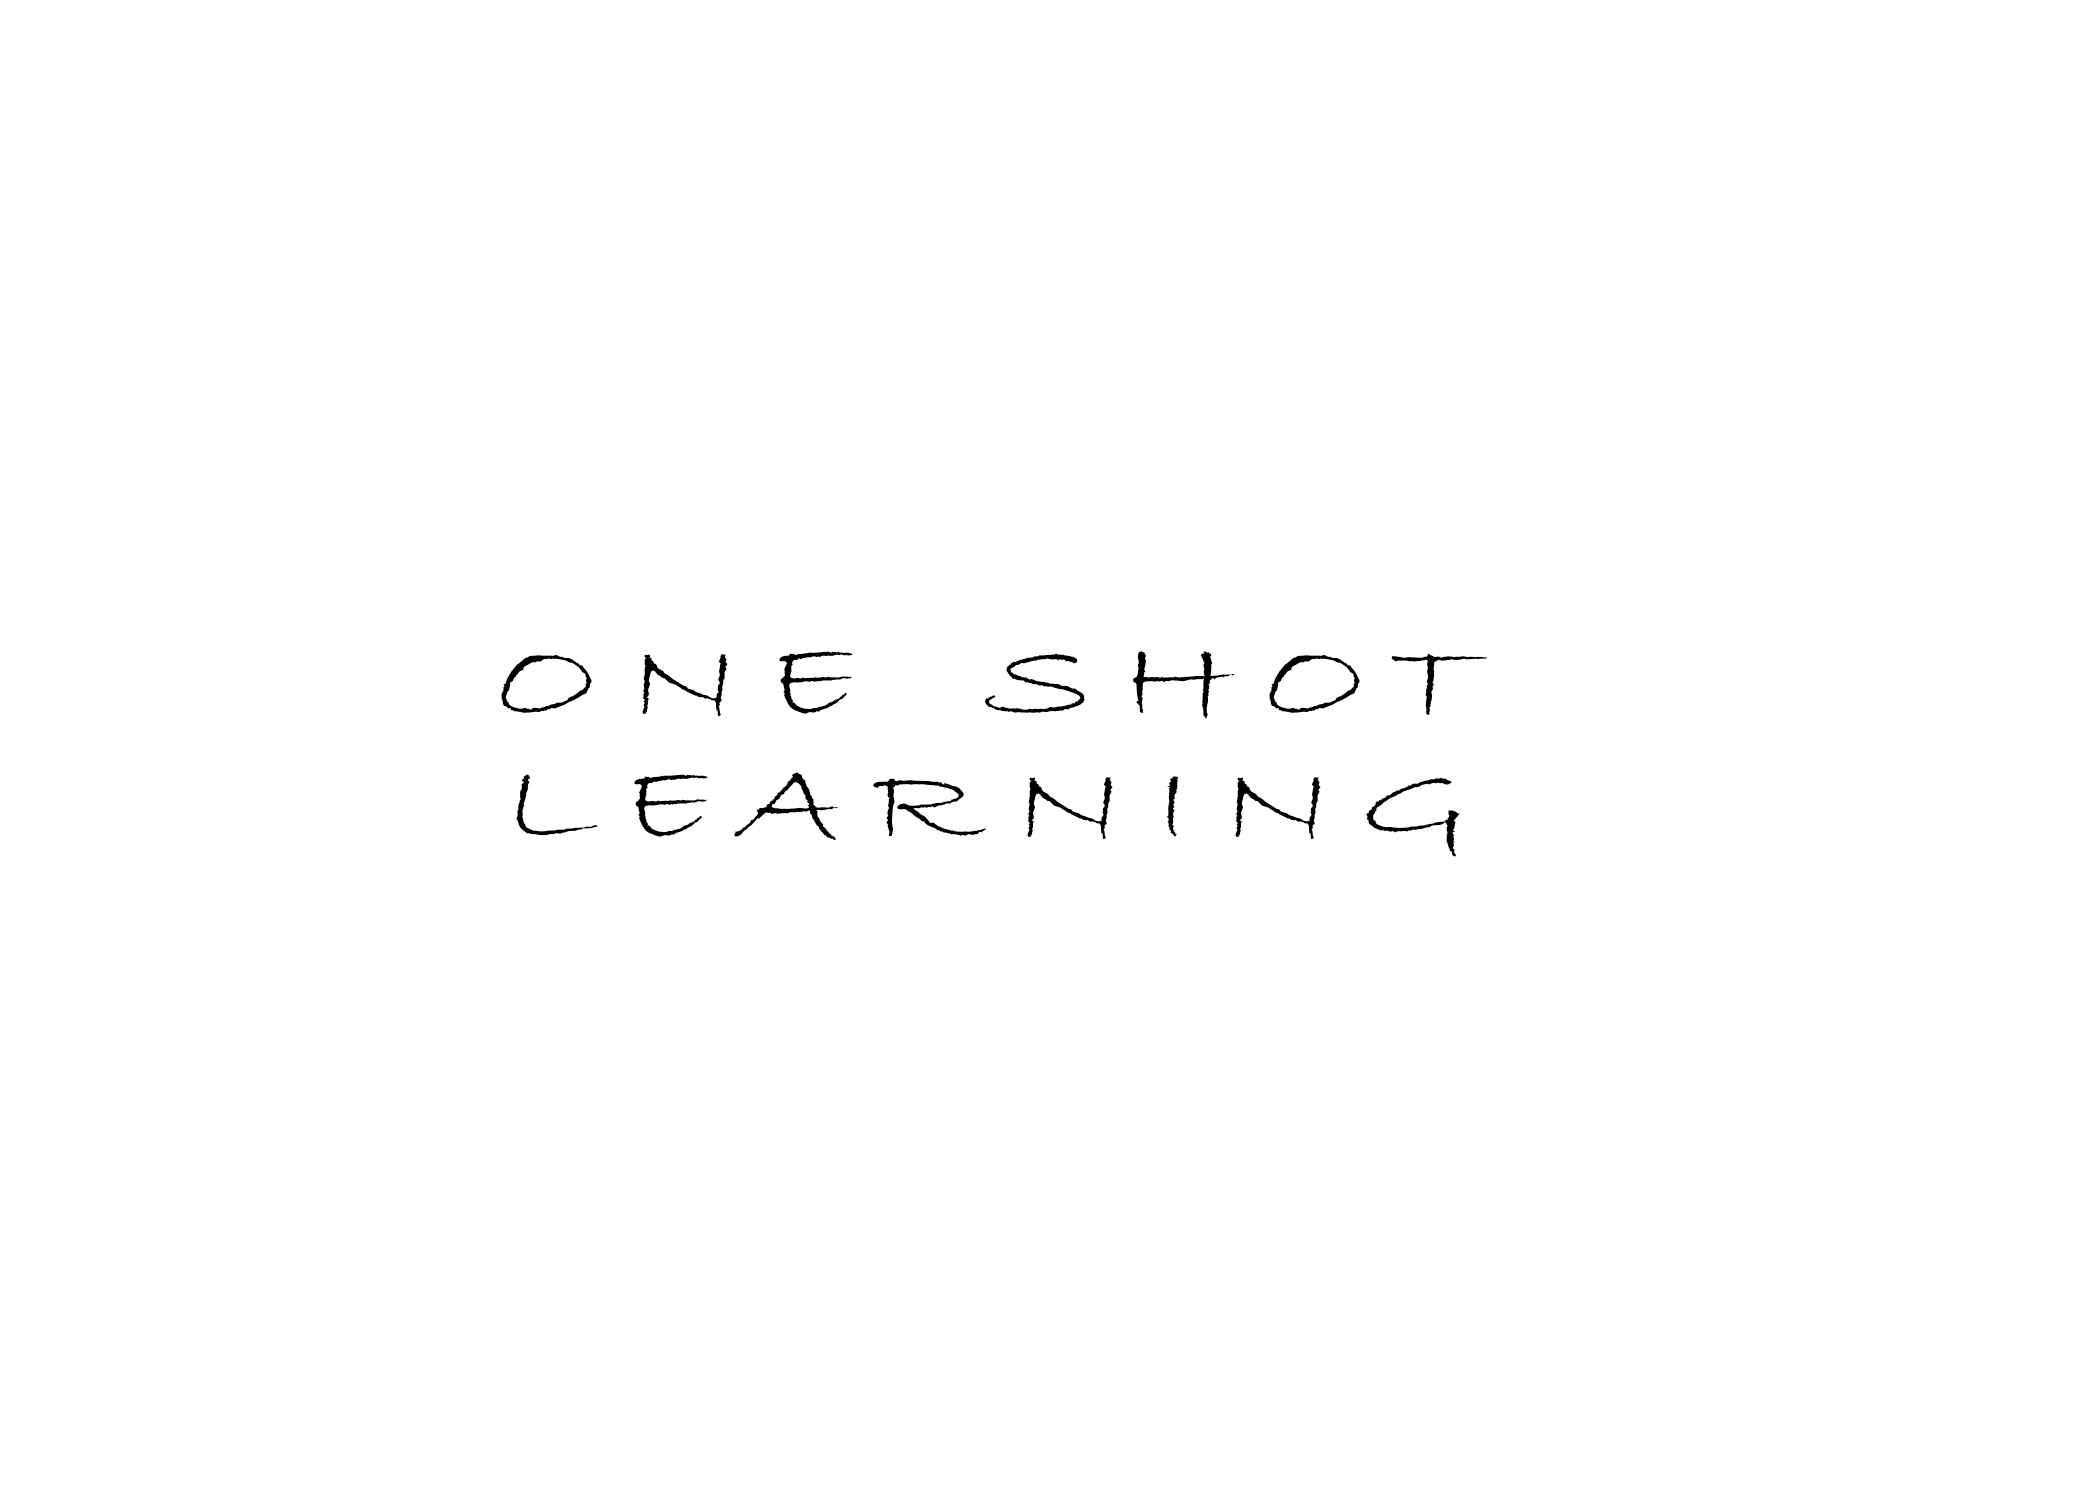 One-Shot Learning